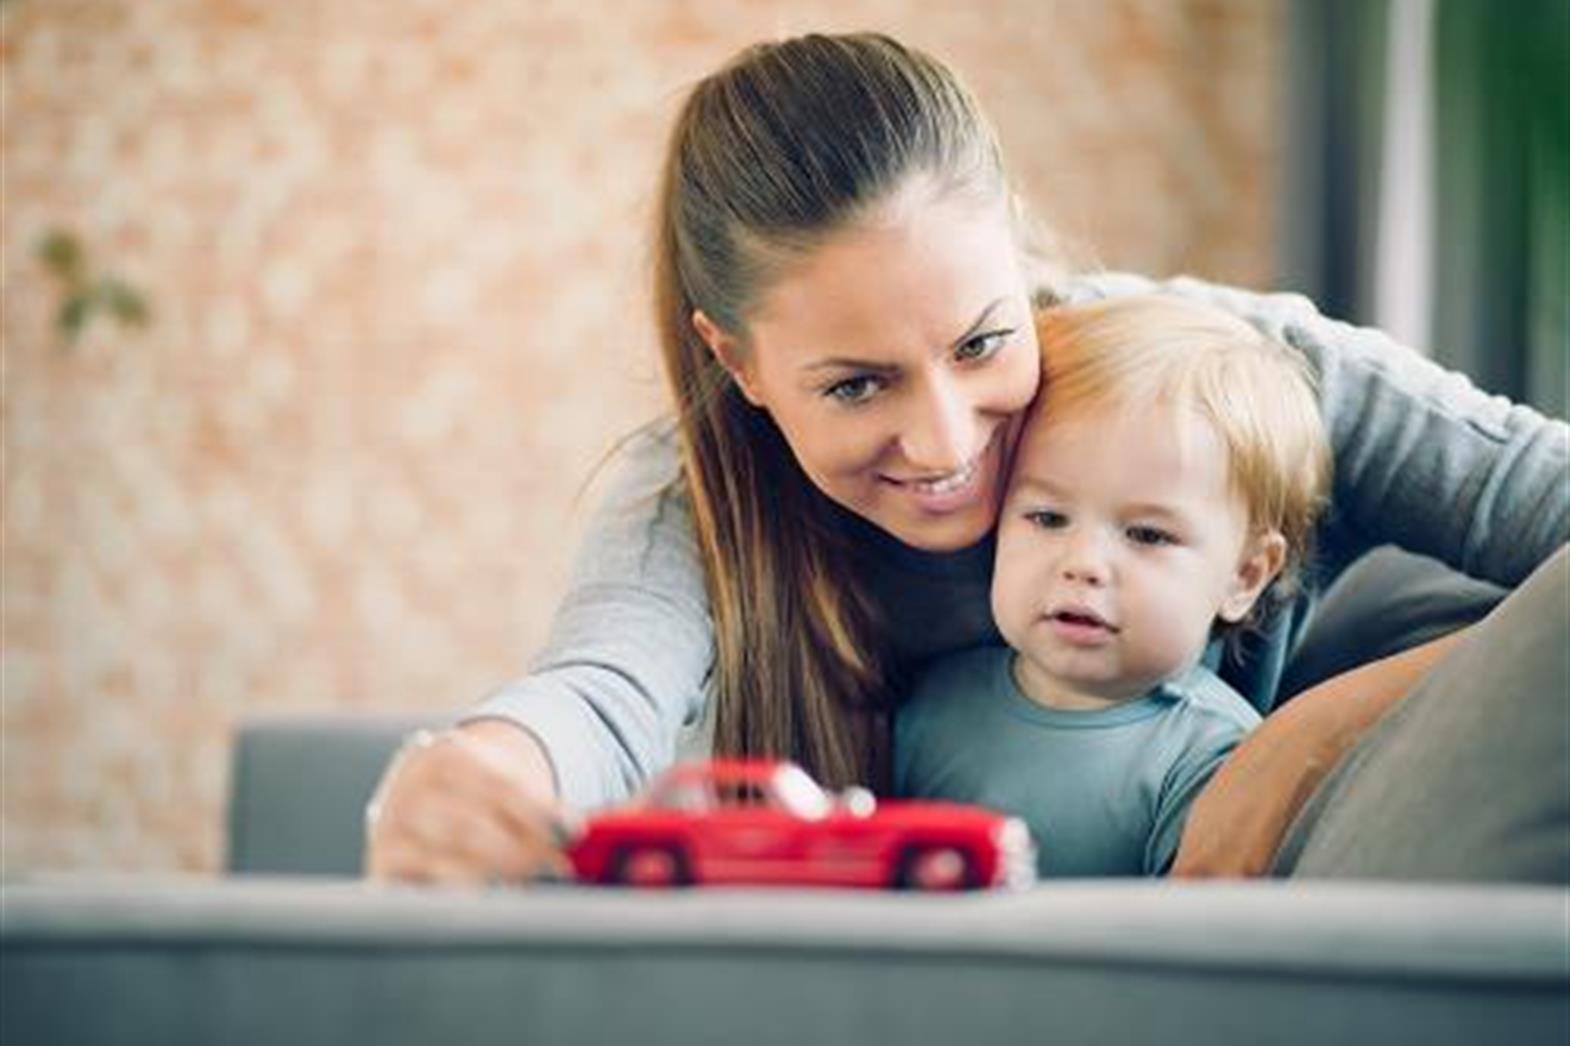 A woman in her early 20s sits with a toddler. They play with a red toy car. 